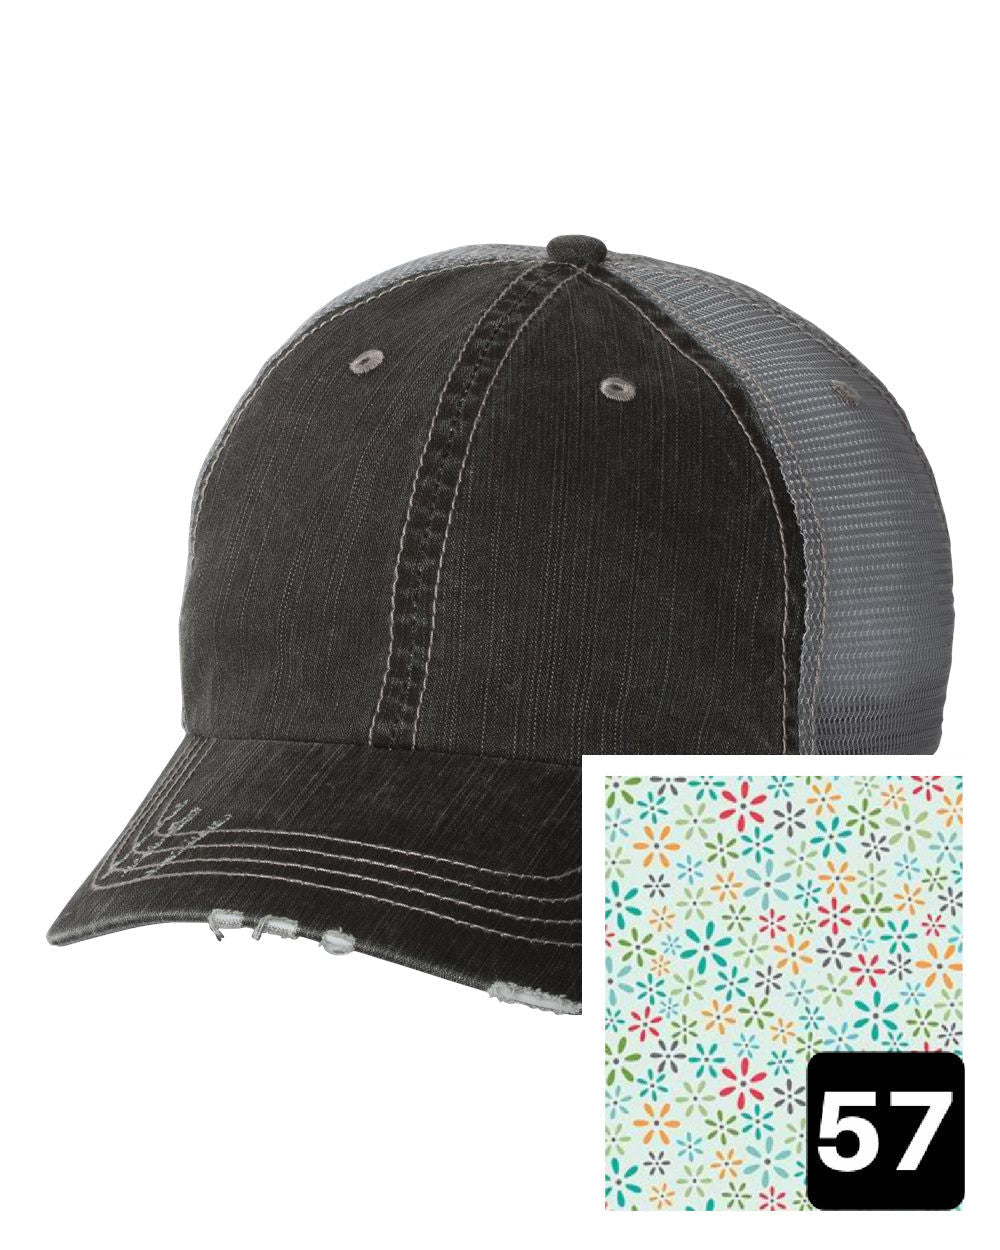 gray distressed trucker hat with white daisy on yellow fabric state of Massachusetts